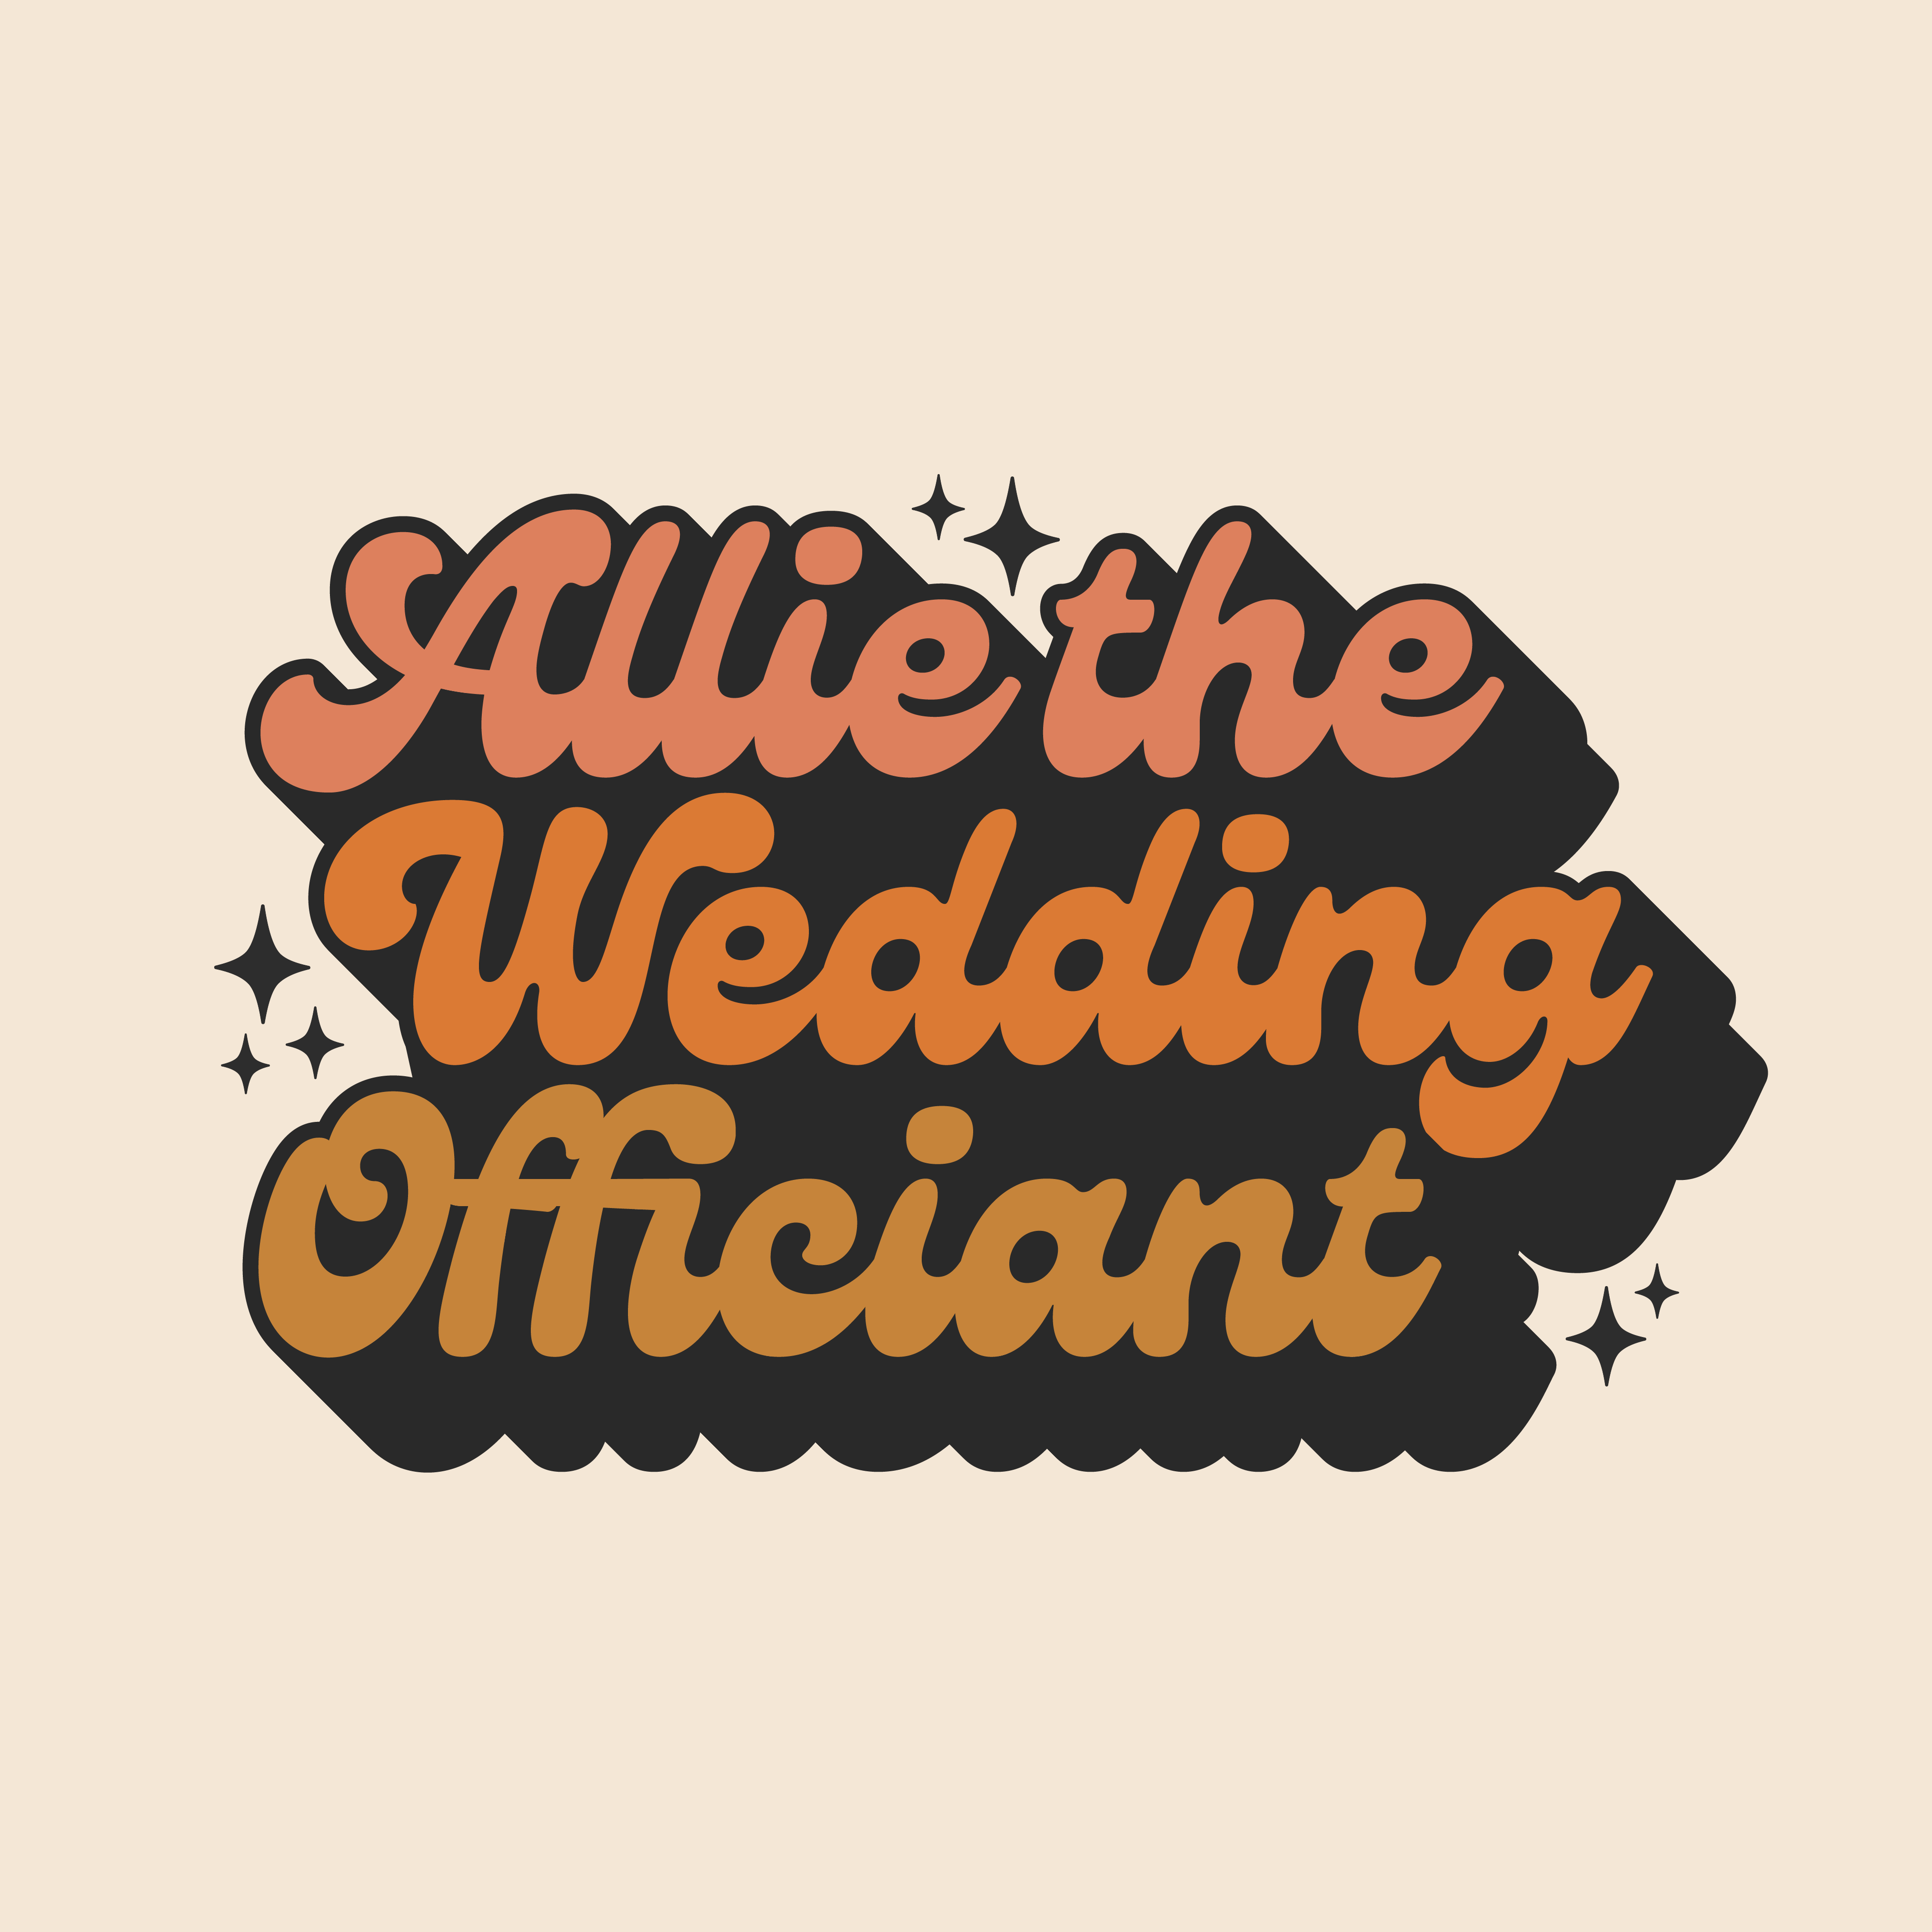 Allie the Wedding Officiant